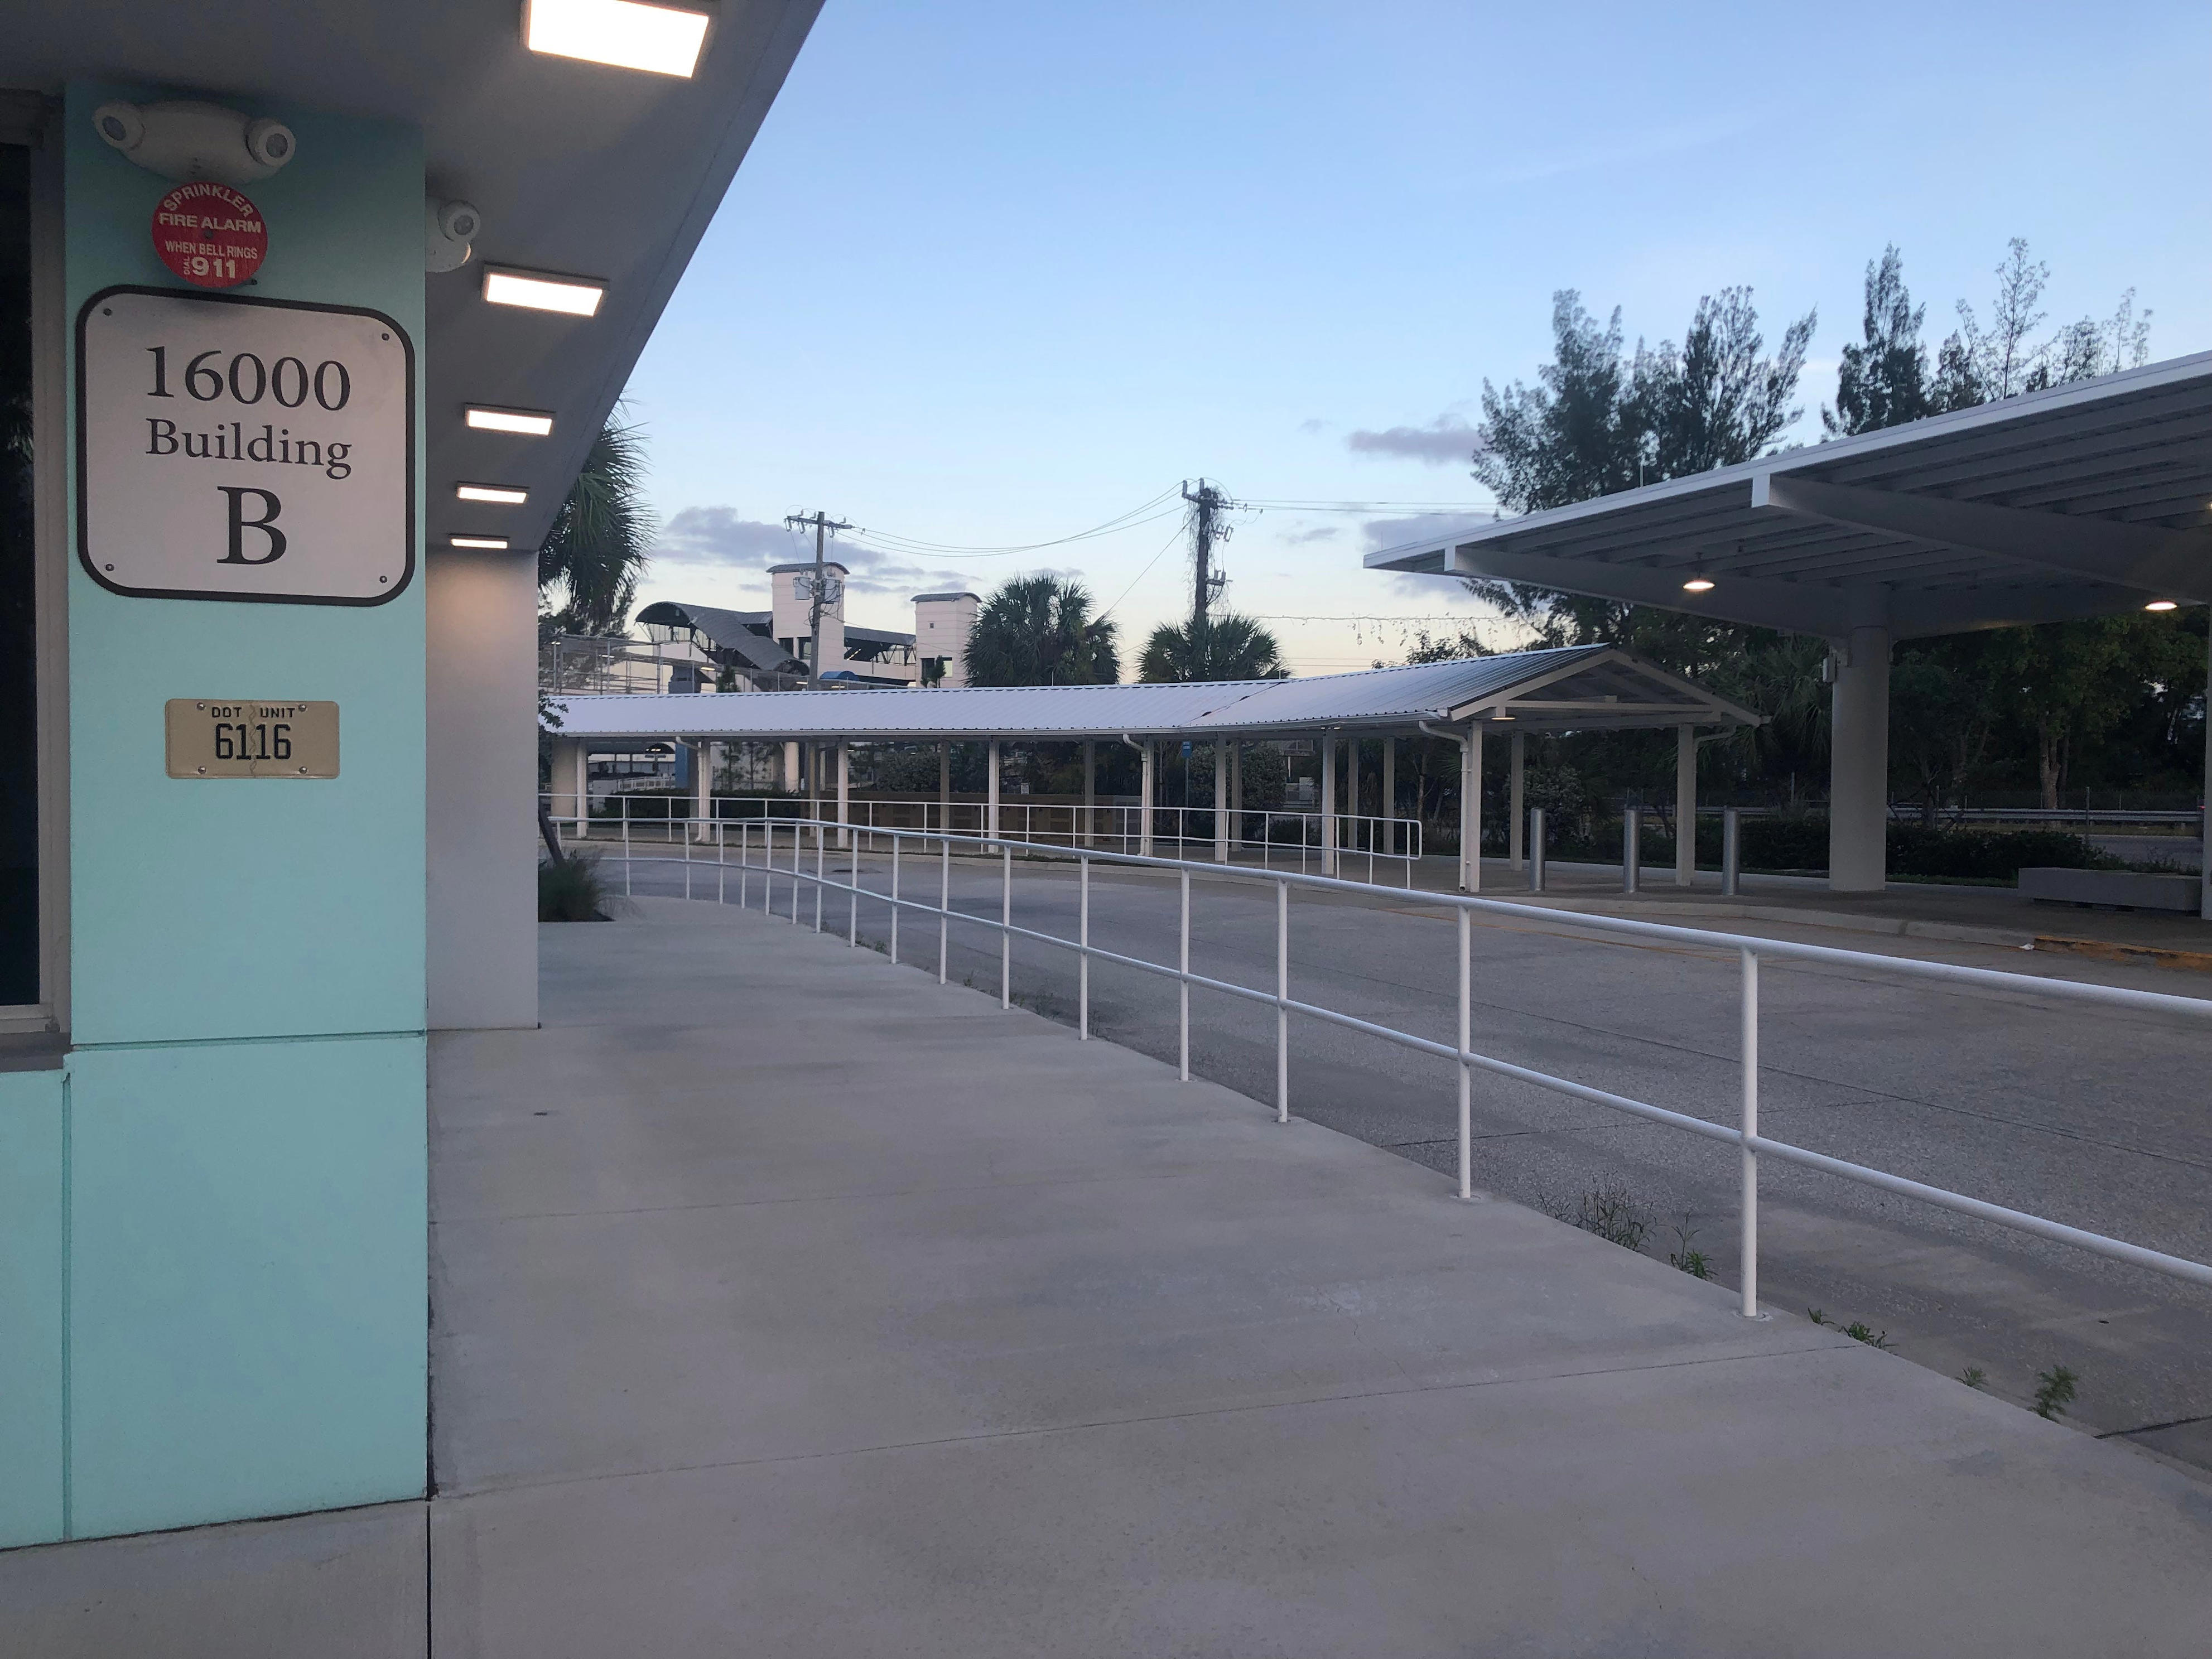 <p>I love traveling, but sometimes, I don't want to deal with the uncertainty that comes with it. Because of this, I was super glad the Golden Glades station in Miami, where my bus would be departing from, was so easy to navigate.</p><p>I was able to park for free in the garage next to the bus platforms, which was an added bonus. Plus, the station had a clean-looking restroom and waiting area.</p><p>Overall, getting around the station was peaceful.</p>